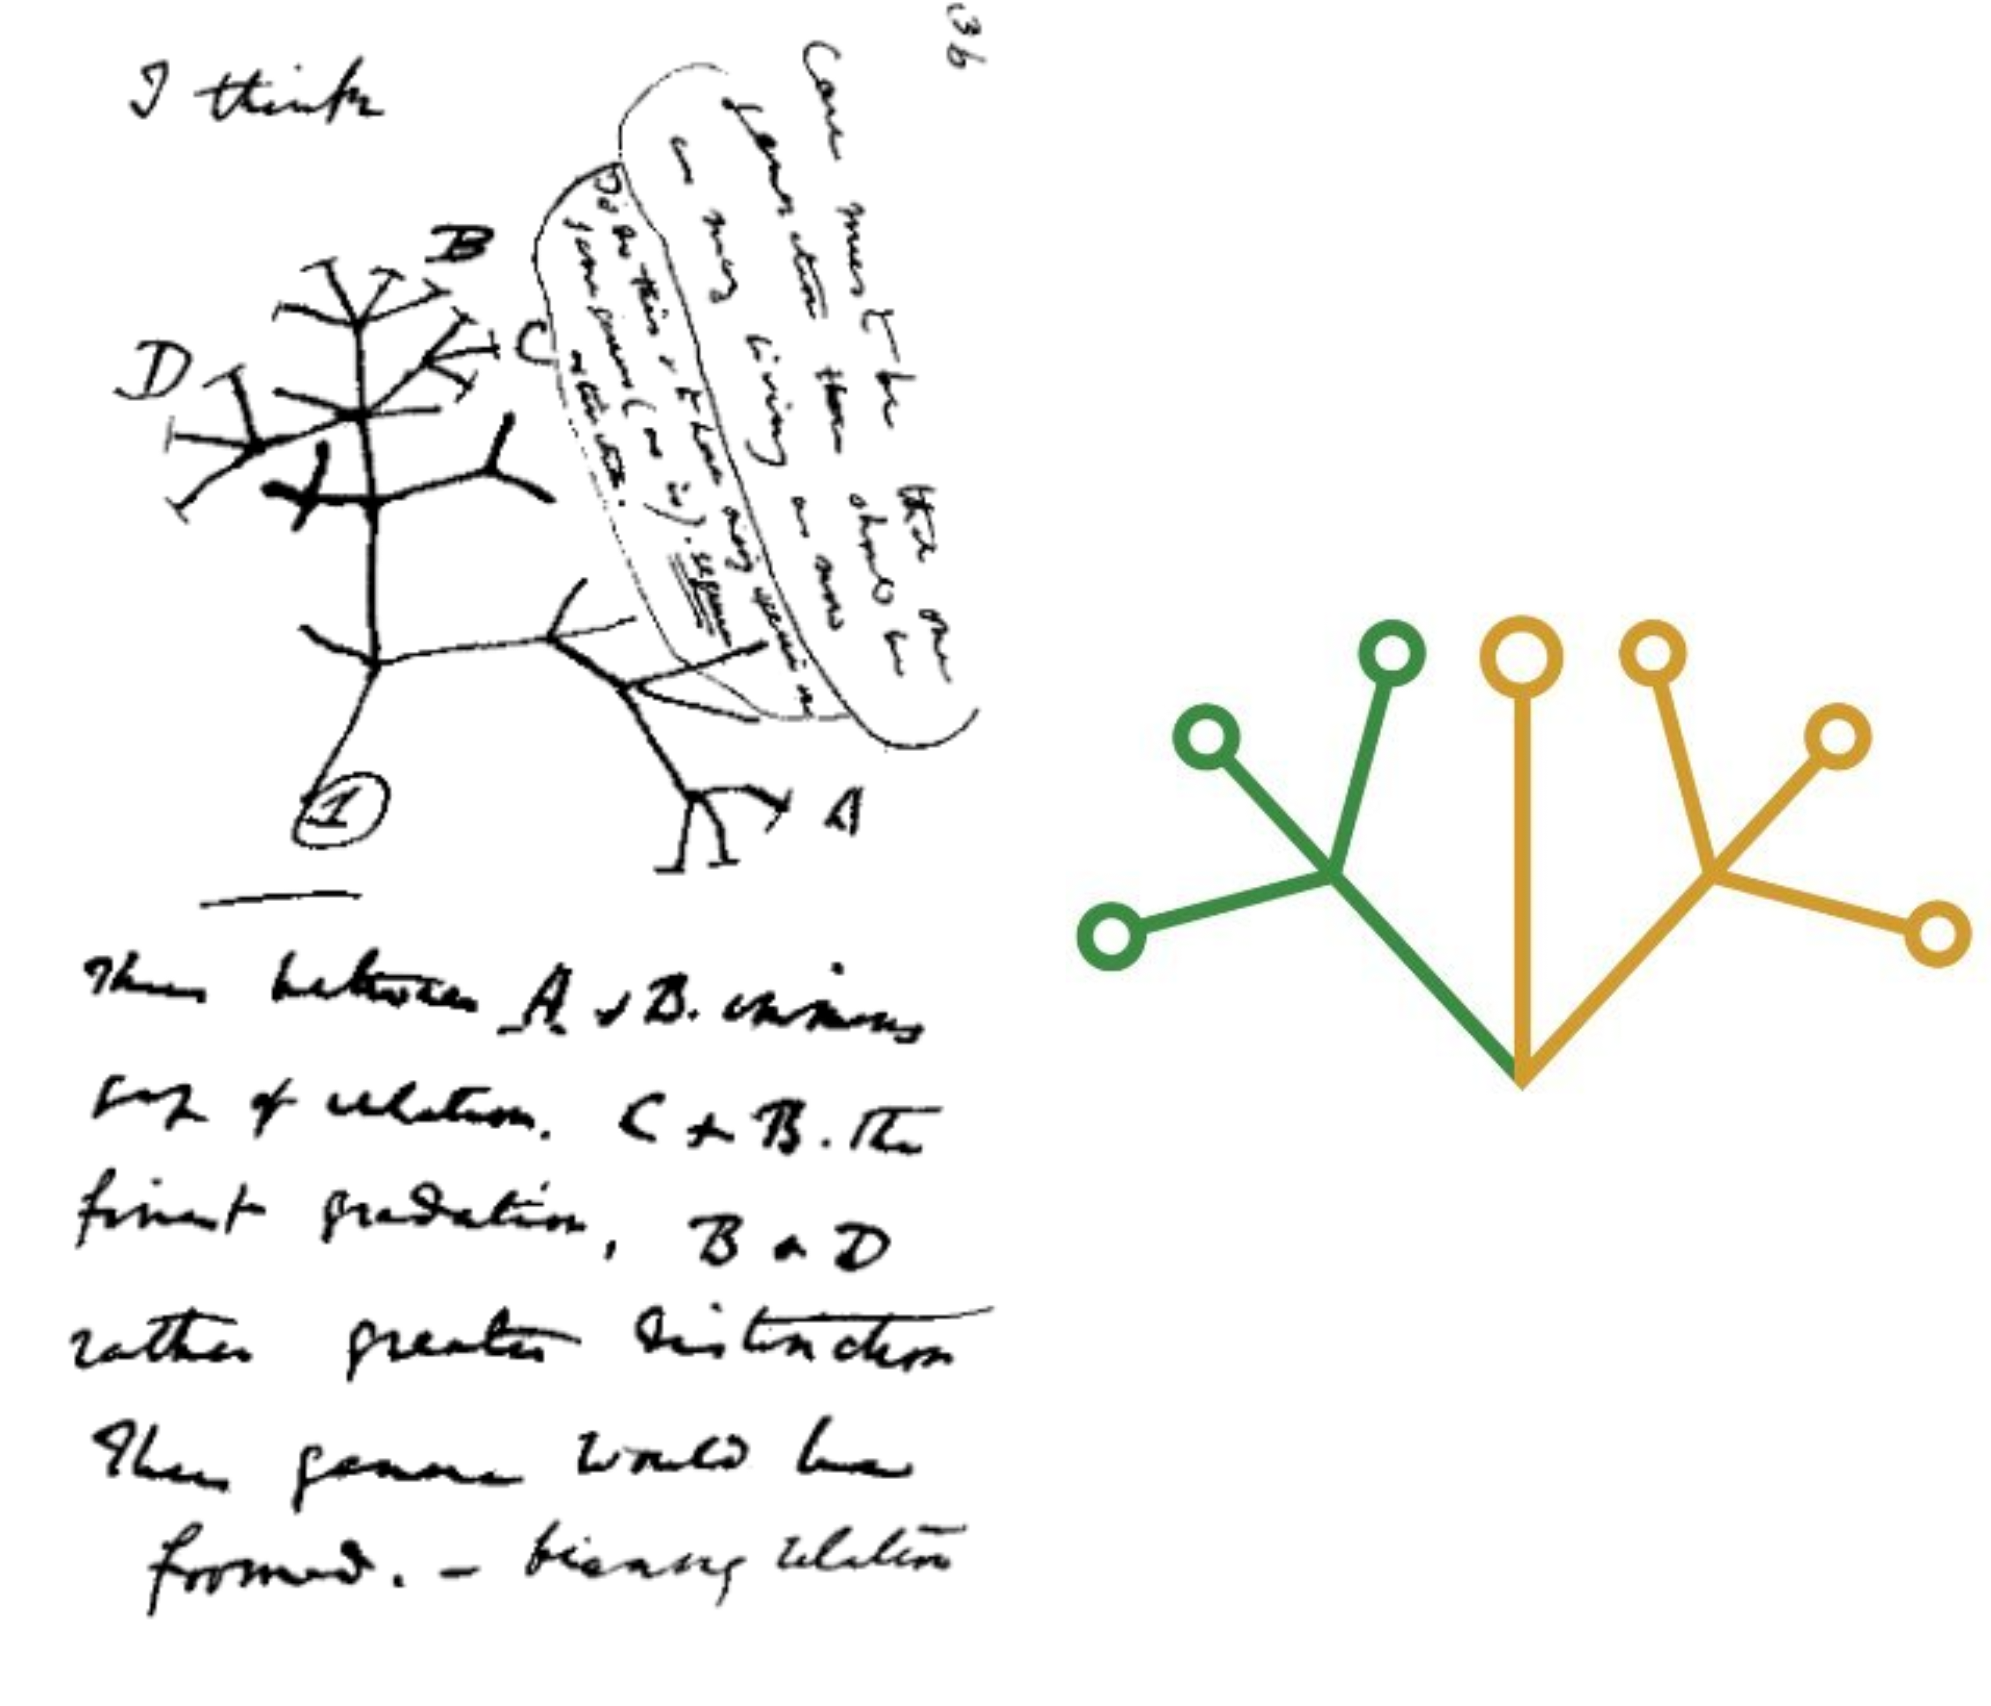 Figure 1: Left: Darwin’s sketch later used in a modified form in ‘The Origin of Species’ that inspired the title and logo (right) of our textbook. Right: Logo of iThink Biology, used here with permission from the copyright owners.